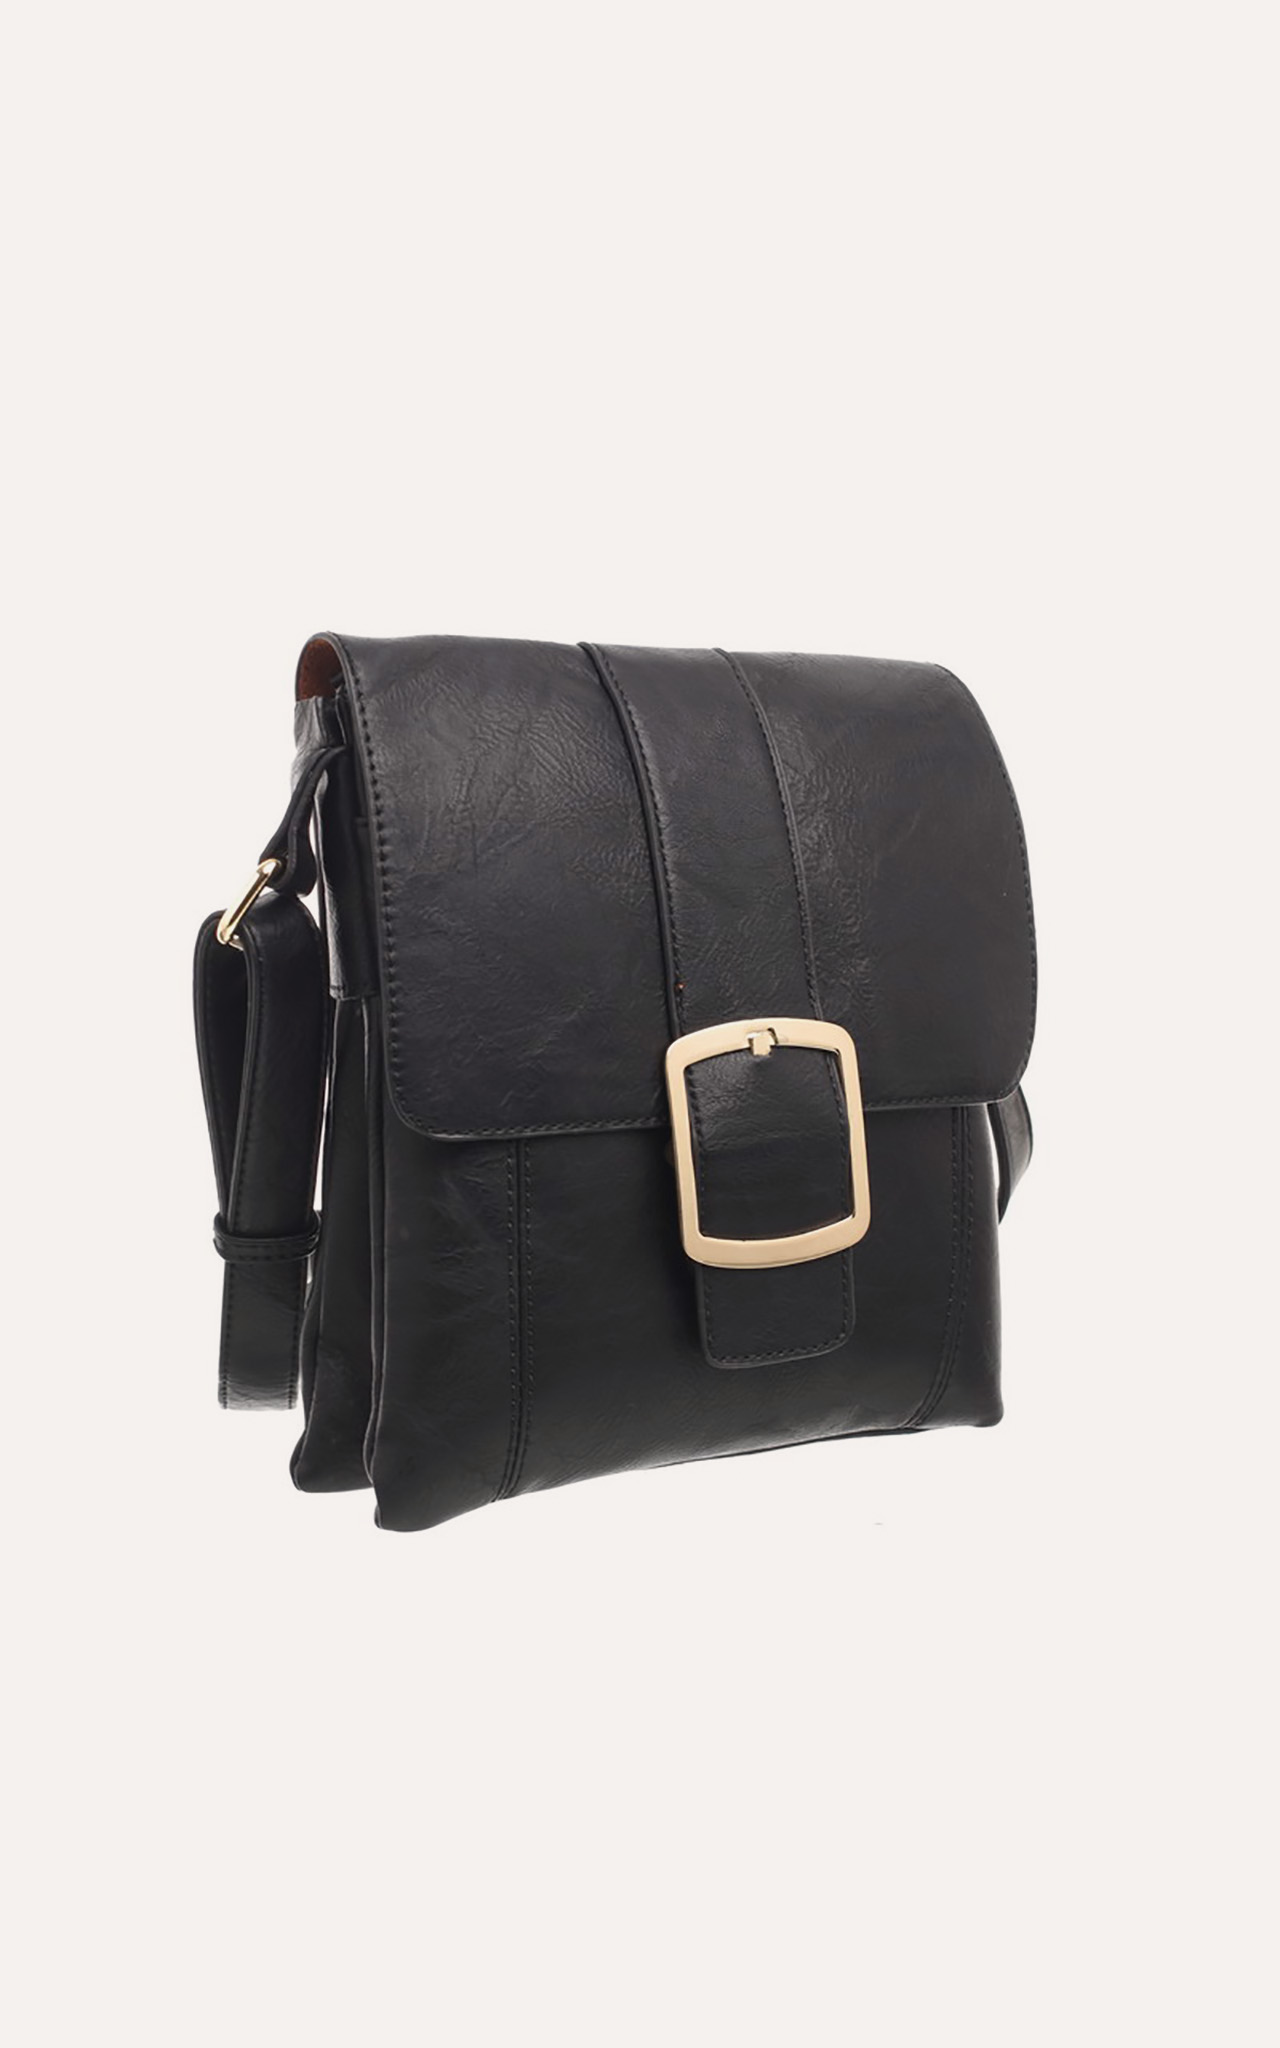 Download CLASSIC FLAP OVER BUCKLE CROSS BODY BAG - Bessie London